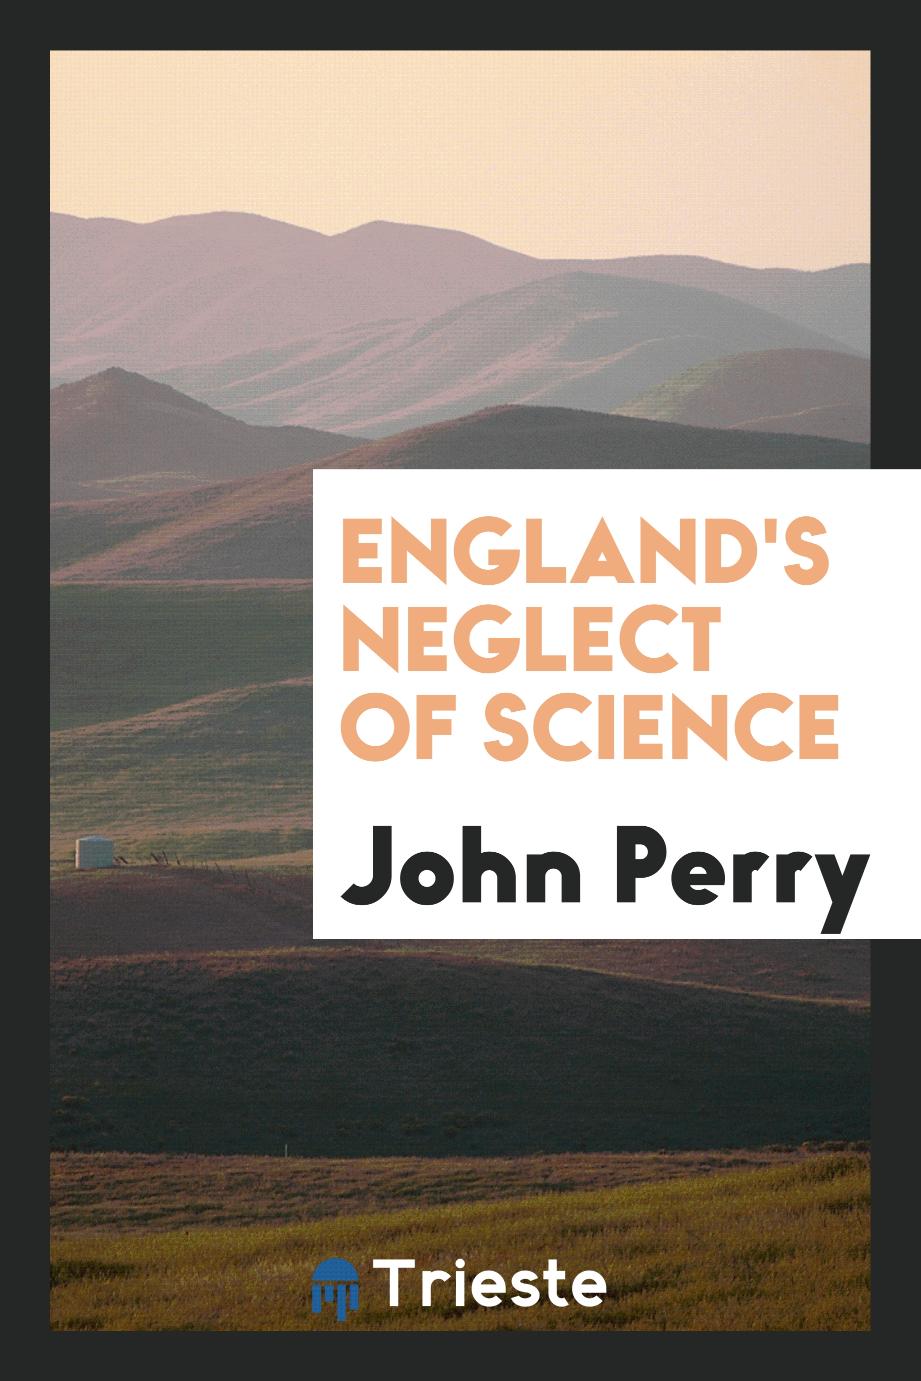 England's Neglect of Science